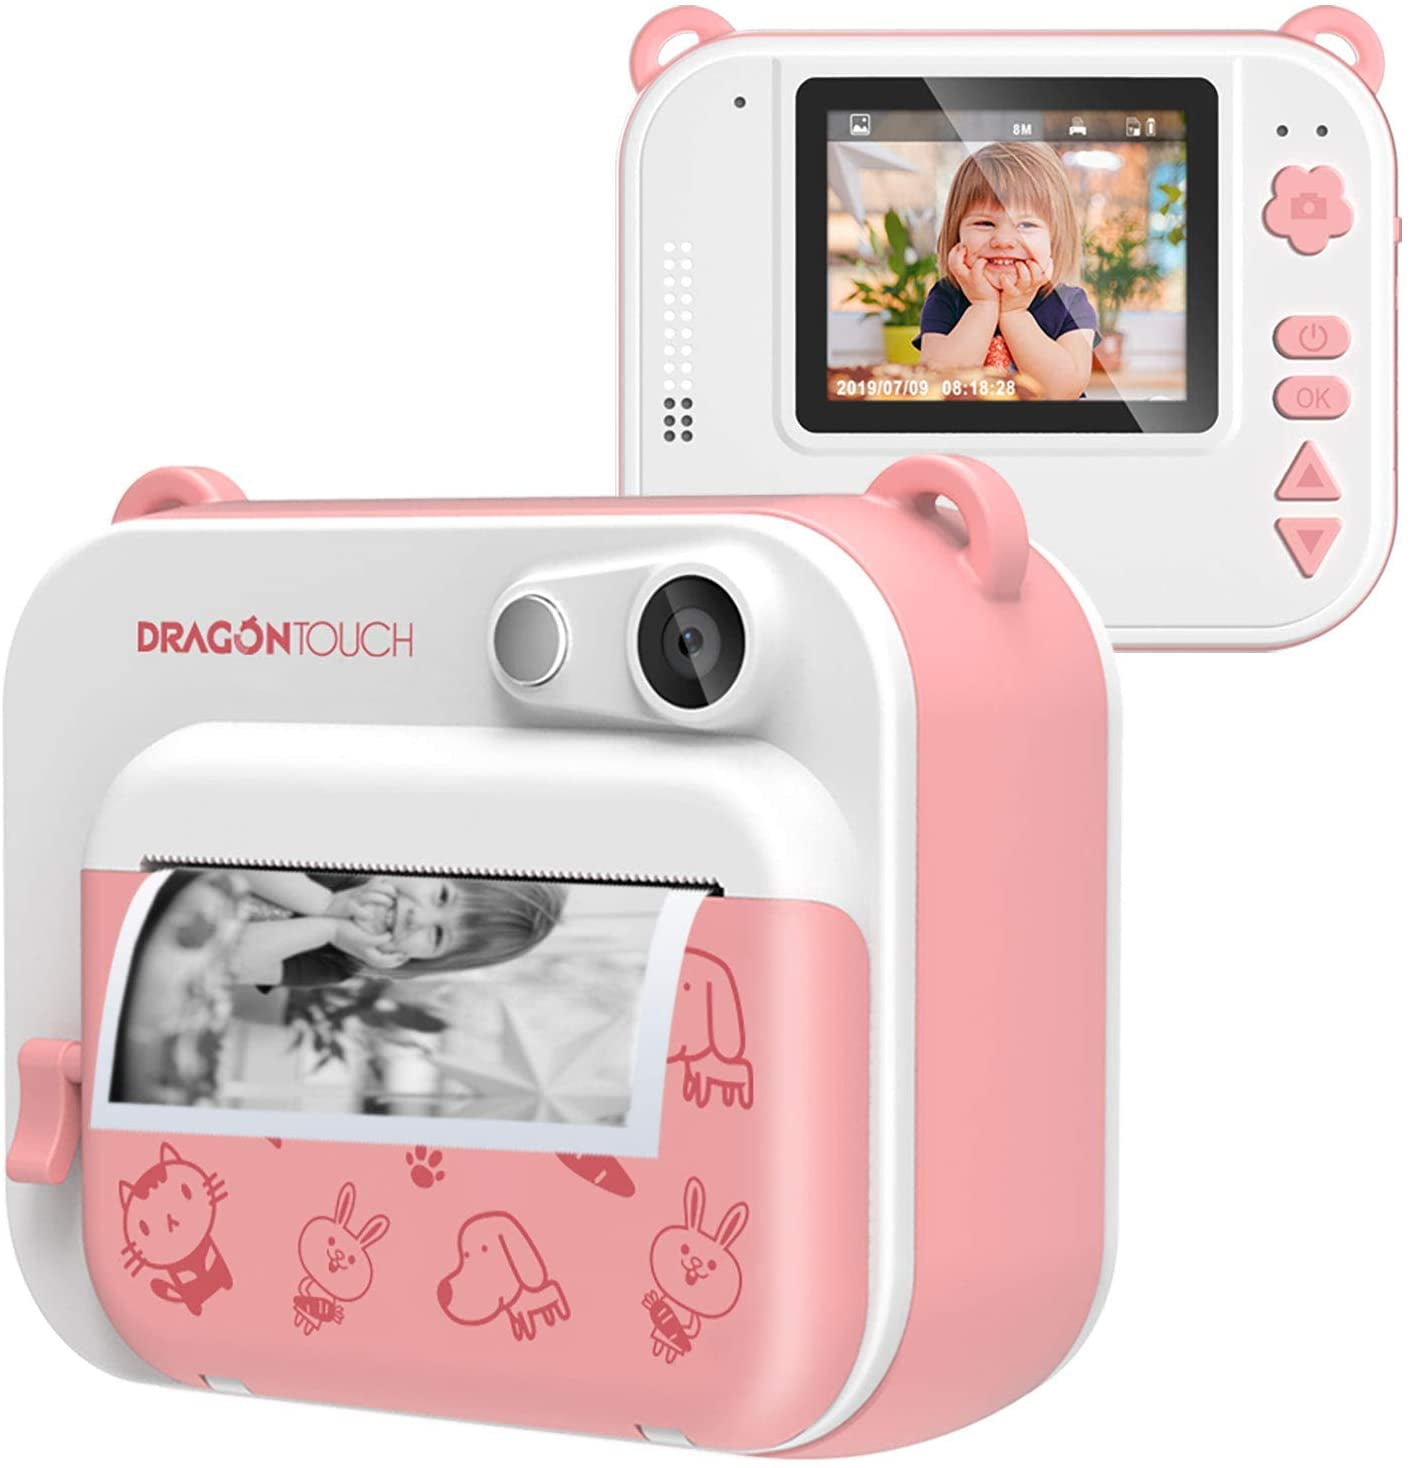 Dragon Touch Instant Print Camera for Kids, Zero Ink Toy Camera